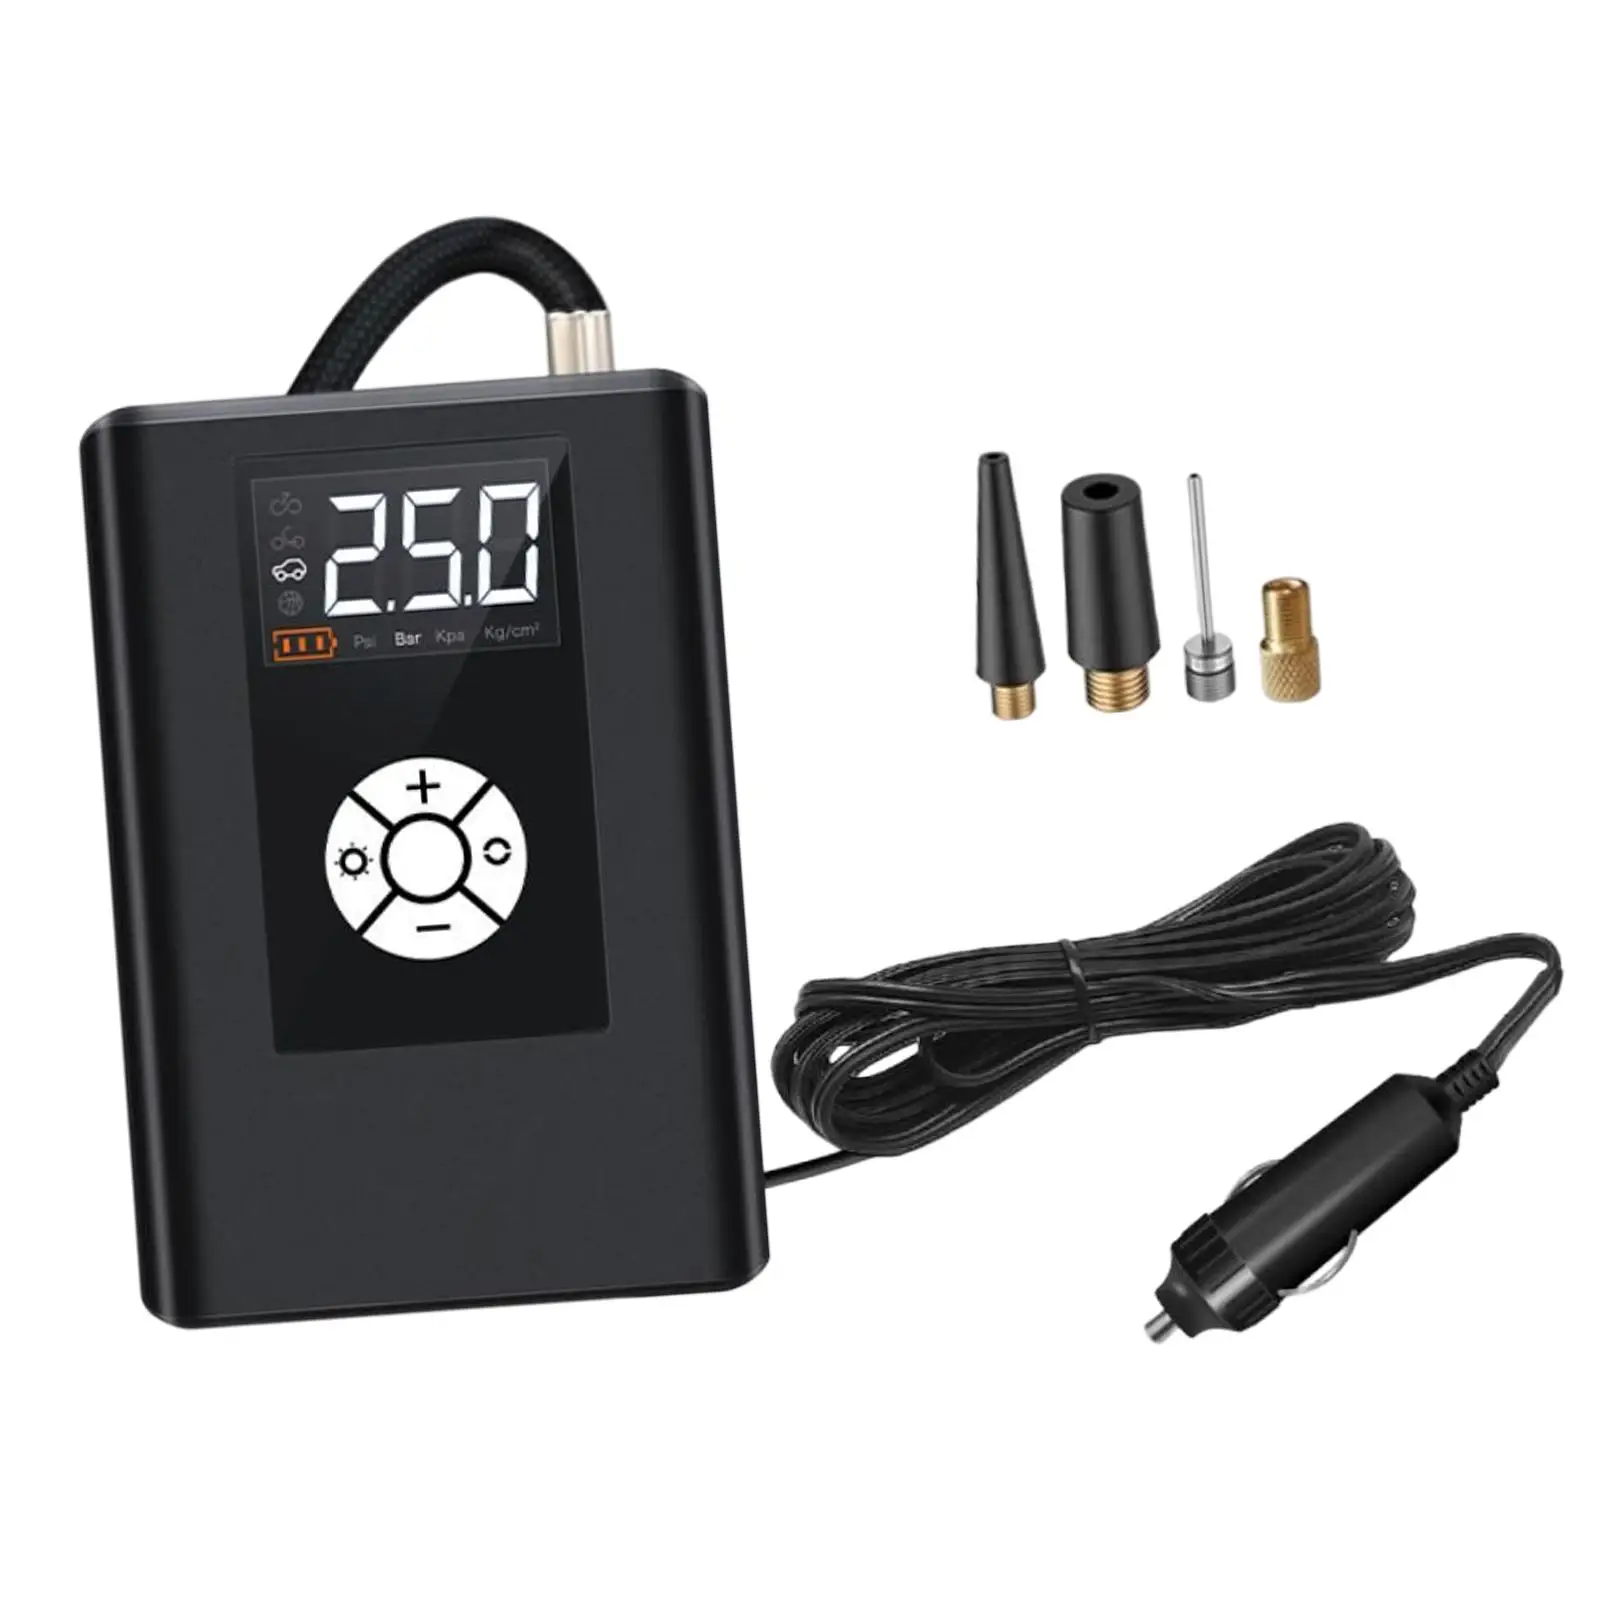 Portable Car Tire Inflator Automotive Accessories with Digital Pressure Gauge Stable Performance